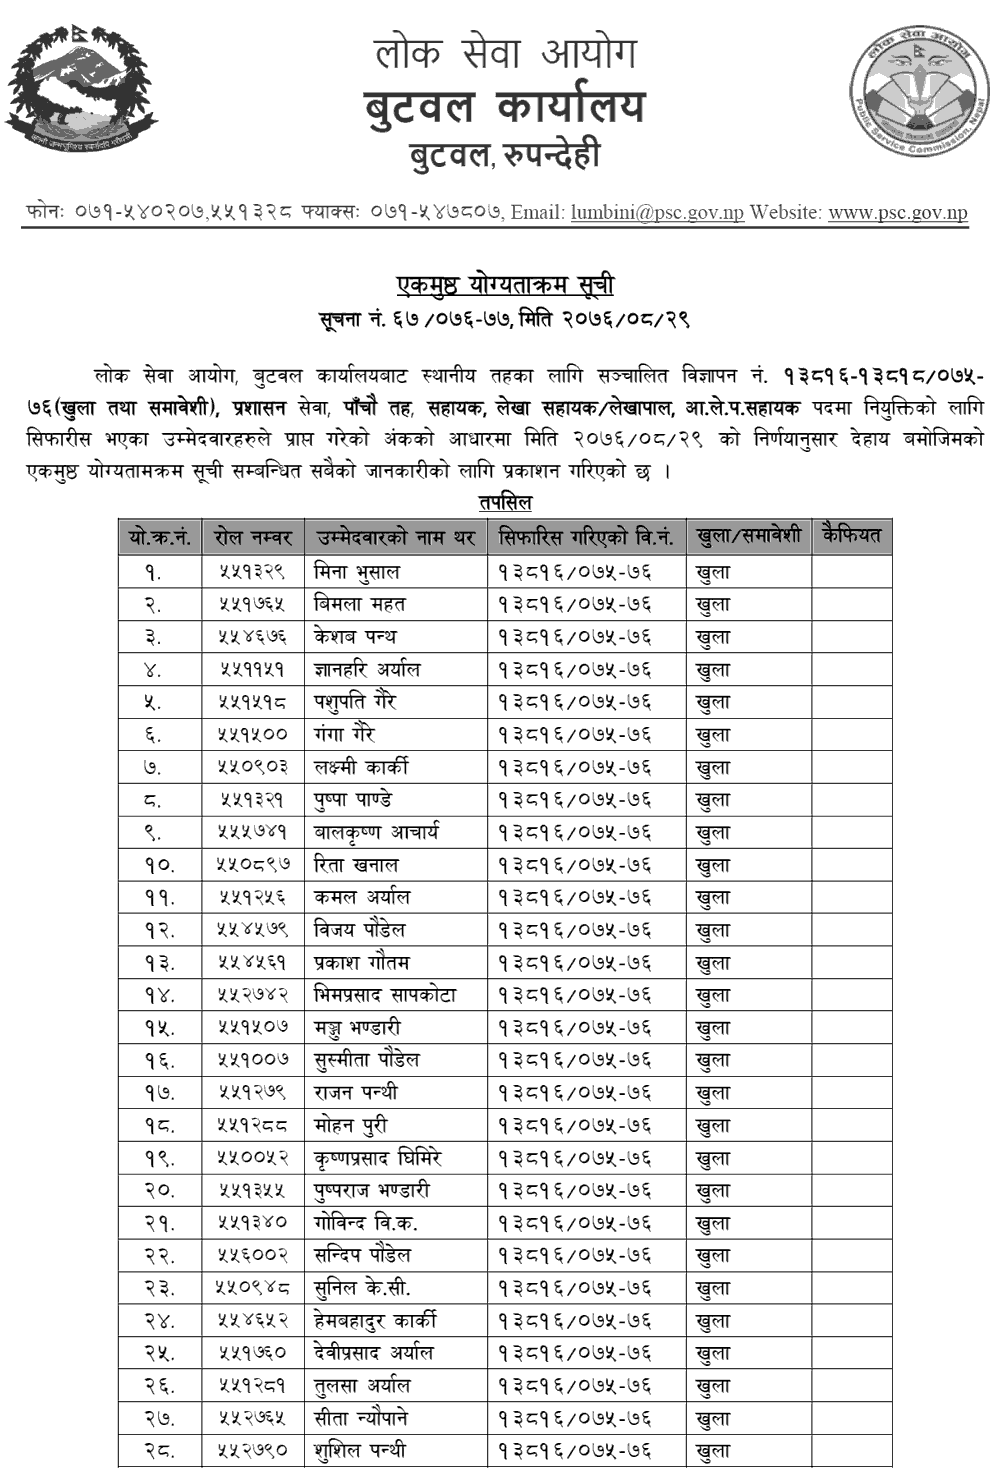 Lok Sewa Aayog Butwal Local Level 5th Assistant Final Result and Appointment